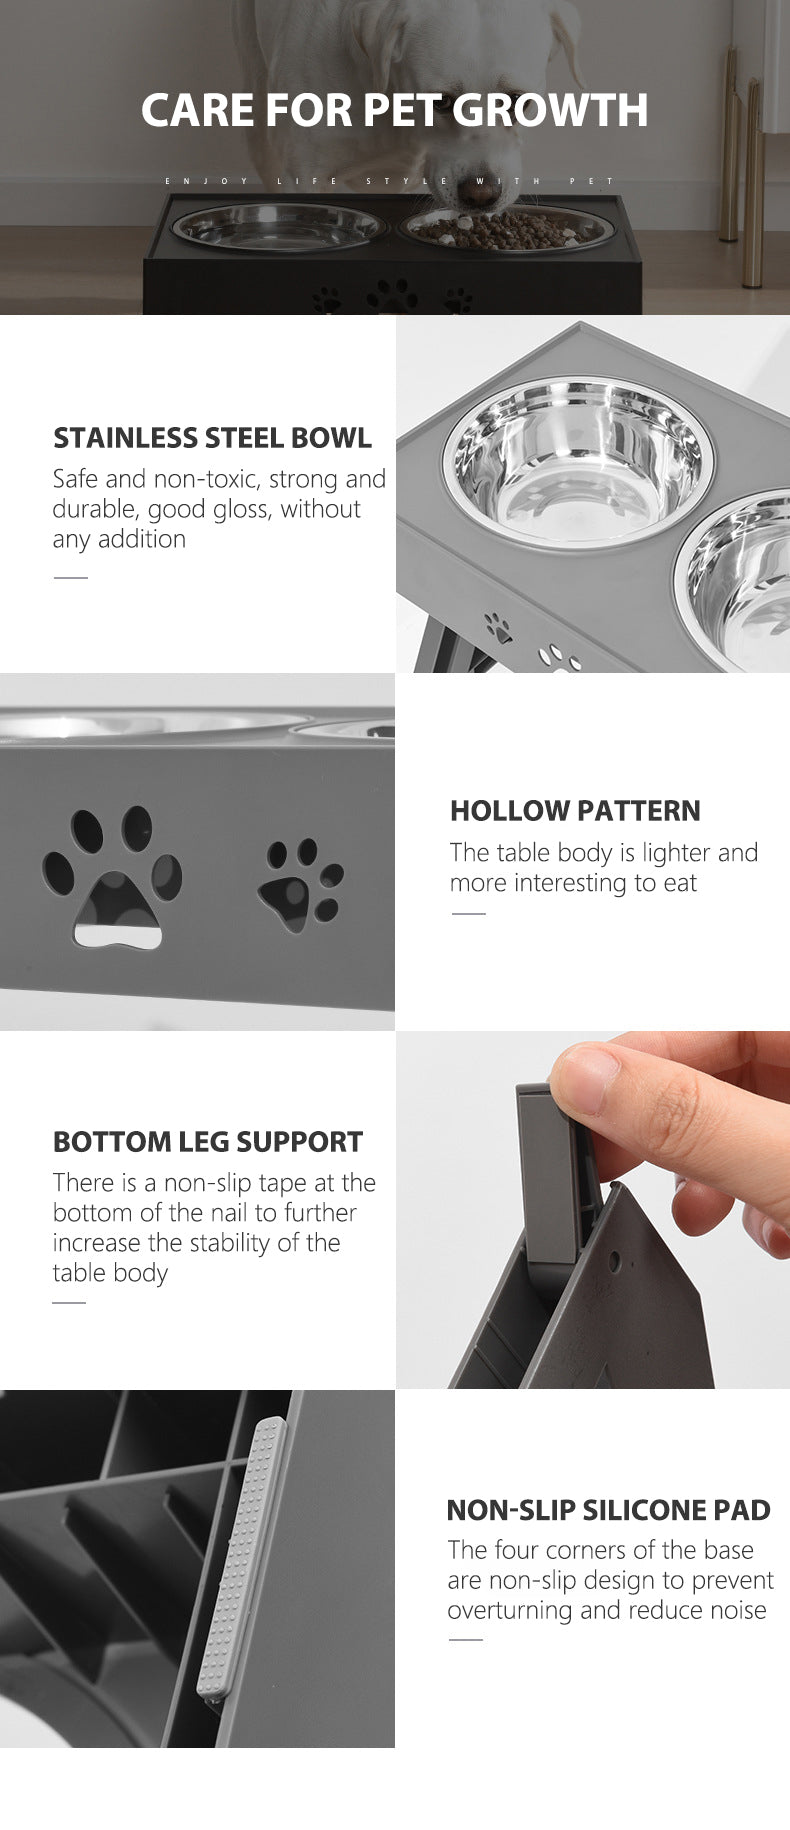 https://cdn.shopify.com/s/files/1/0641/9988/5056/files/Adjustable_Dog_Bowls_Stand_Raised_with_Stainless_Steel_-_Product_Details.jpg?v=1651123773